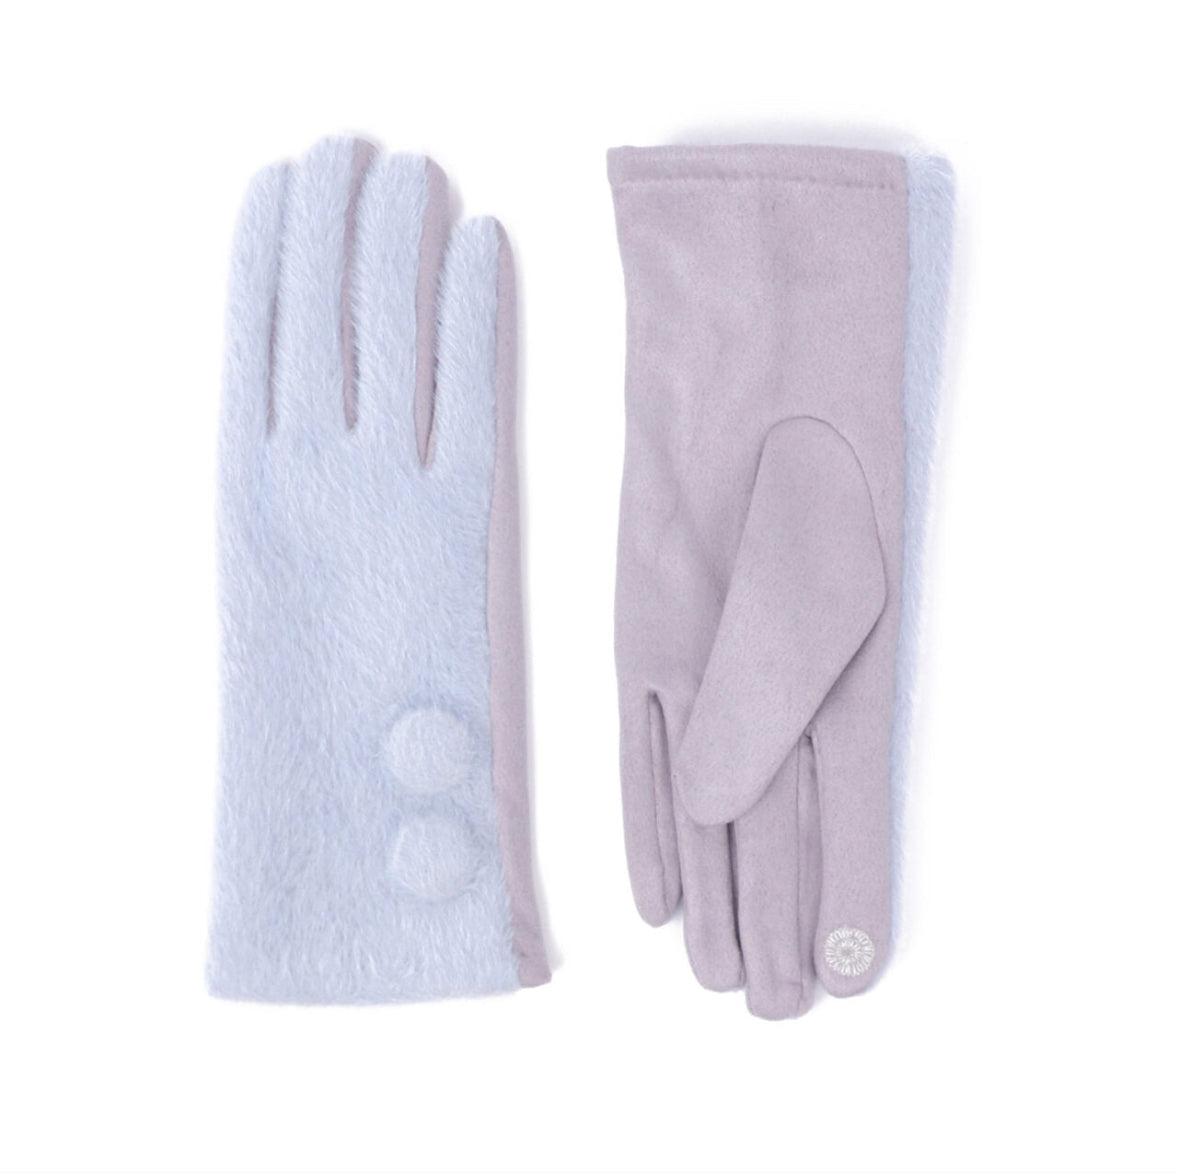 Gloves with Button Details